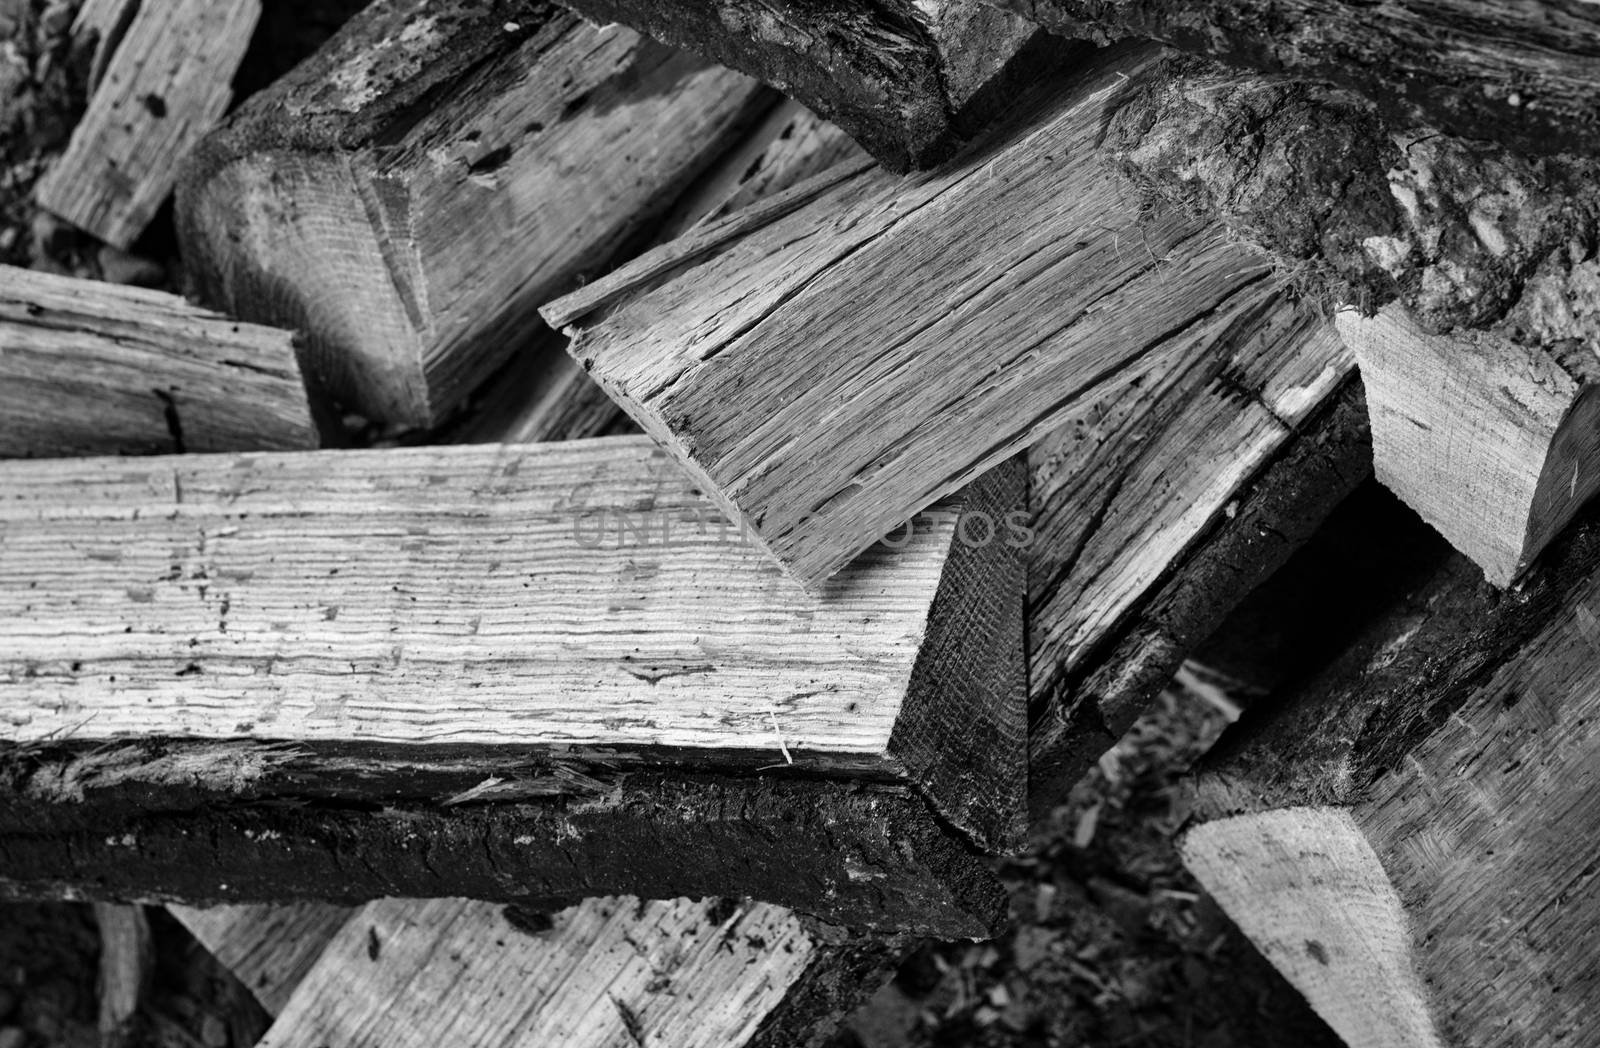 Monochrome view of a jumbled stack of cut and split oak firewood.